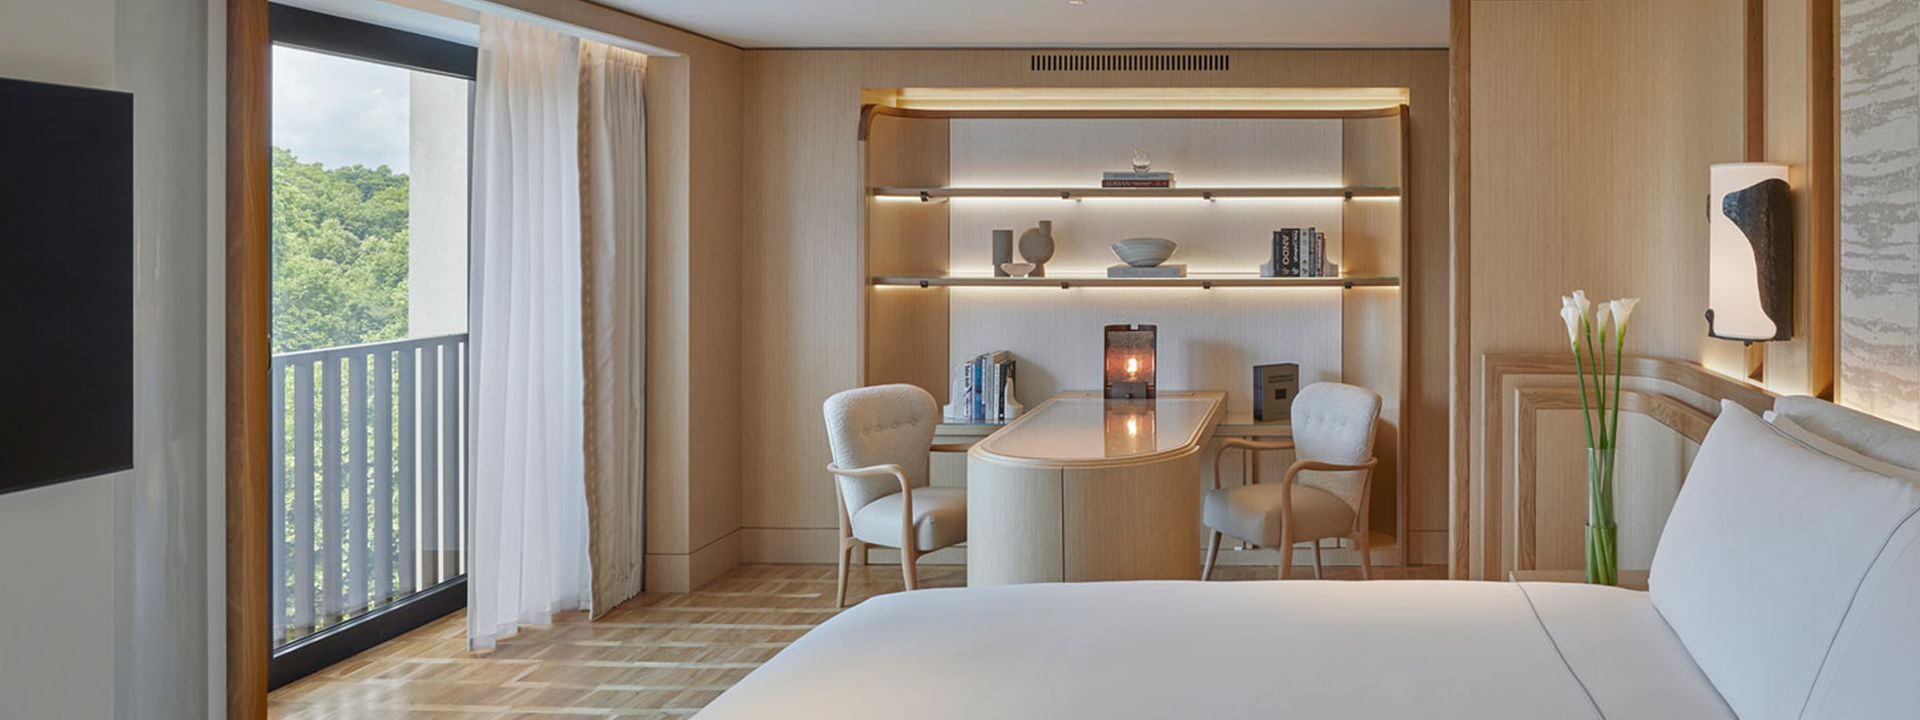 Knightsbridge Pavilion Penthouse - bedroom with bed, office area and shelves on the wall and window  on the left.